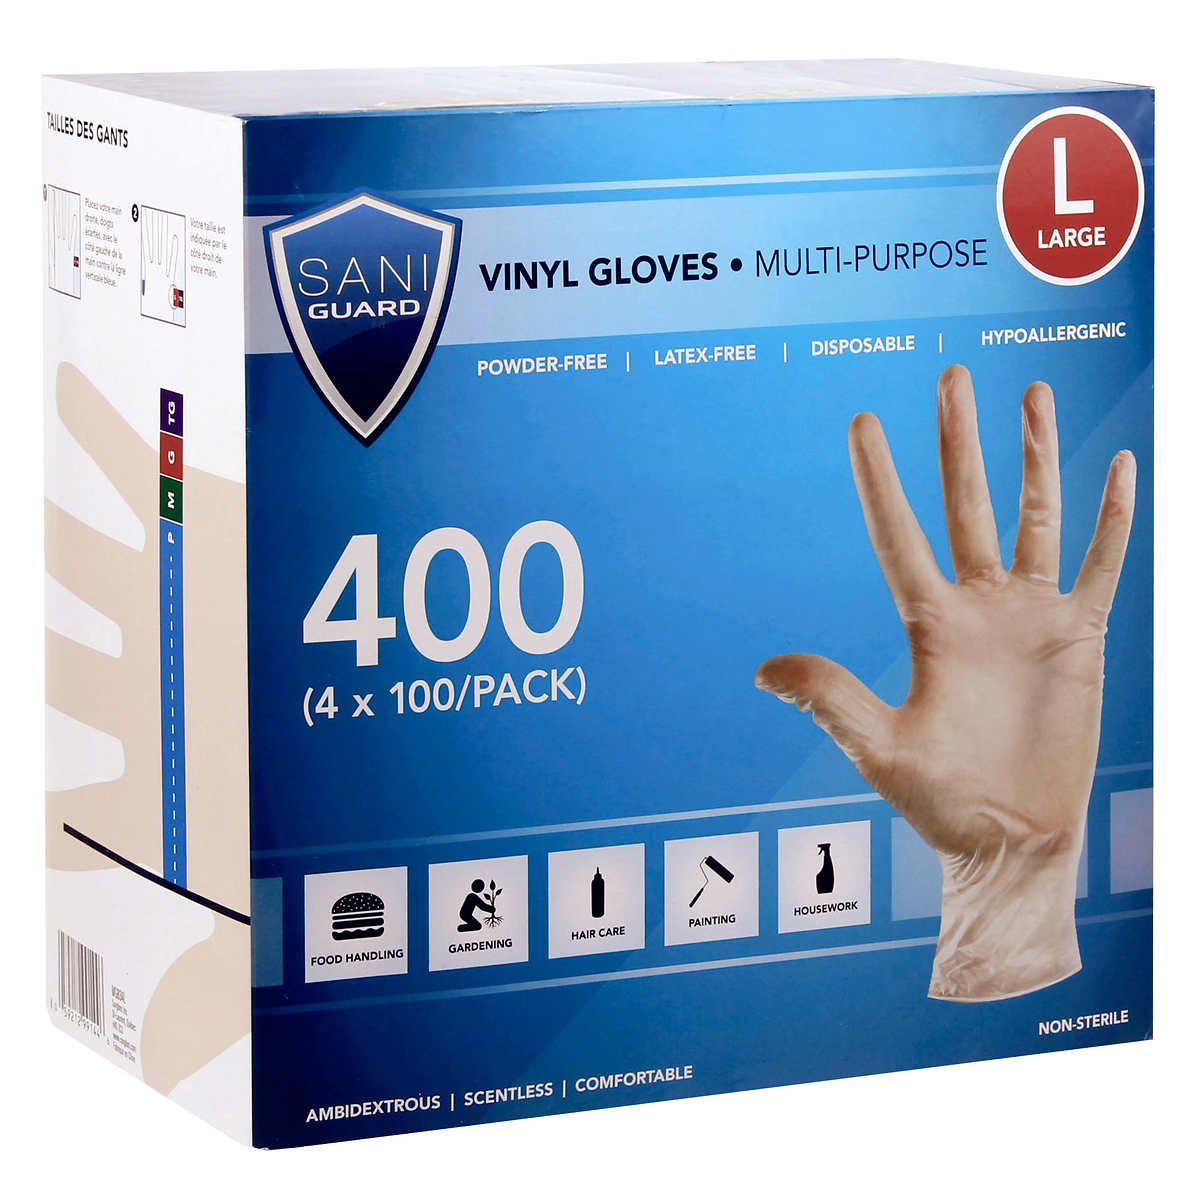 Sani Guard Vinyl Gloves Large 4 Pack Of 100 Costco